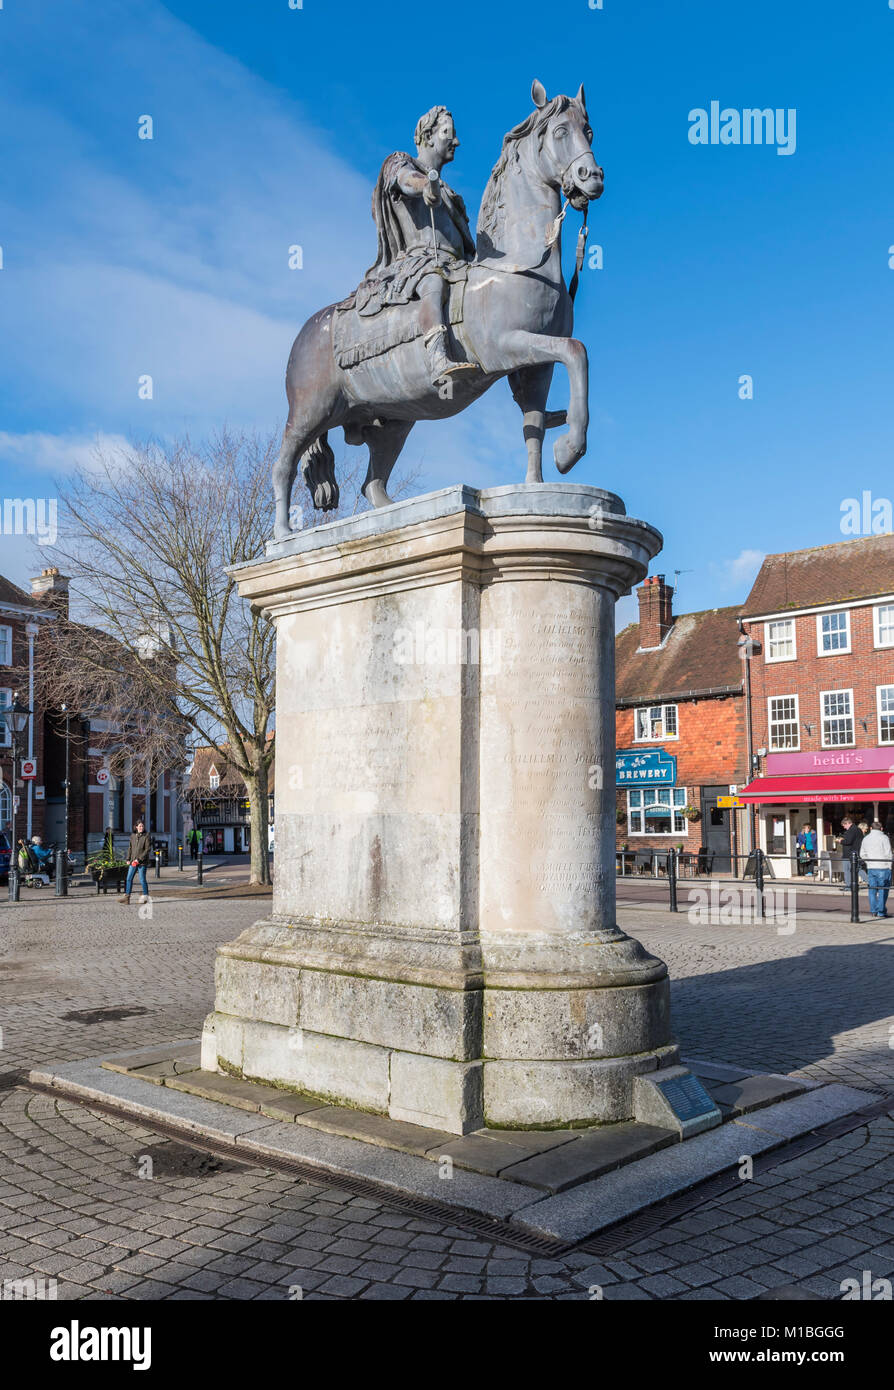 Statue of King William III on a horse on a stone plinth in the town square of Petersfield, Hampshire, England, UK. Stock Photo